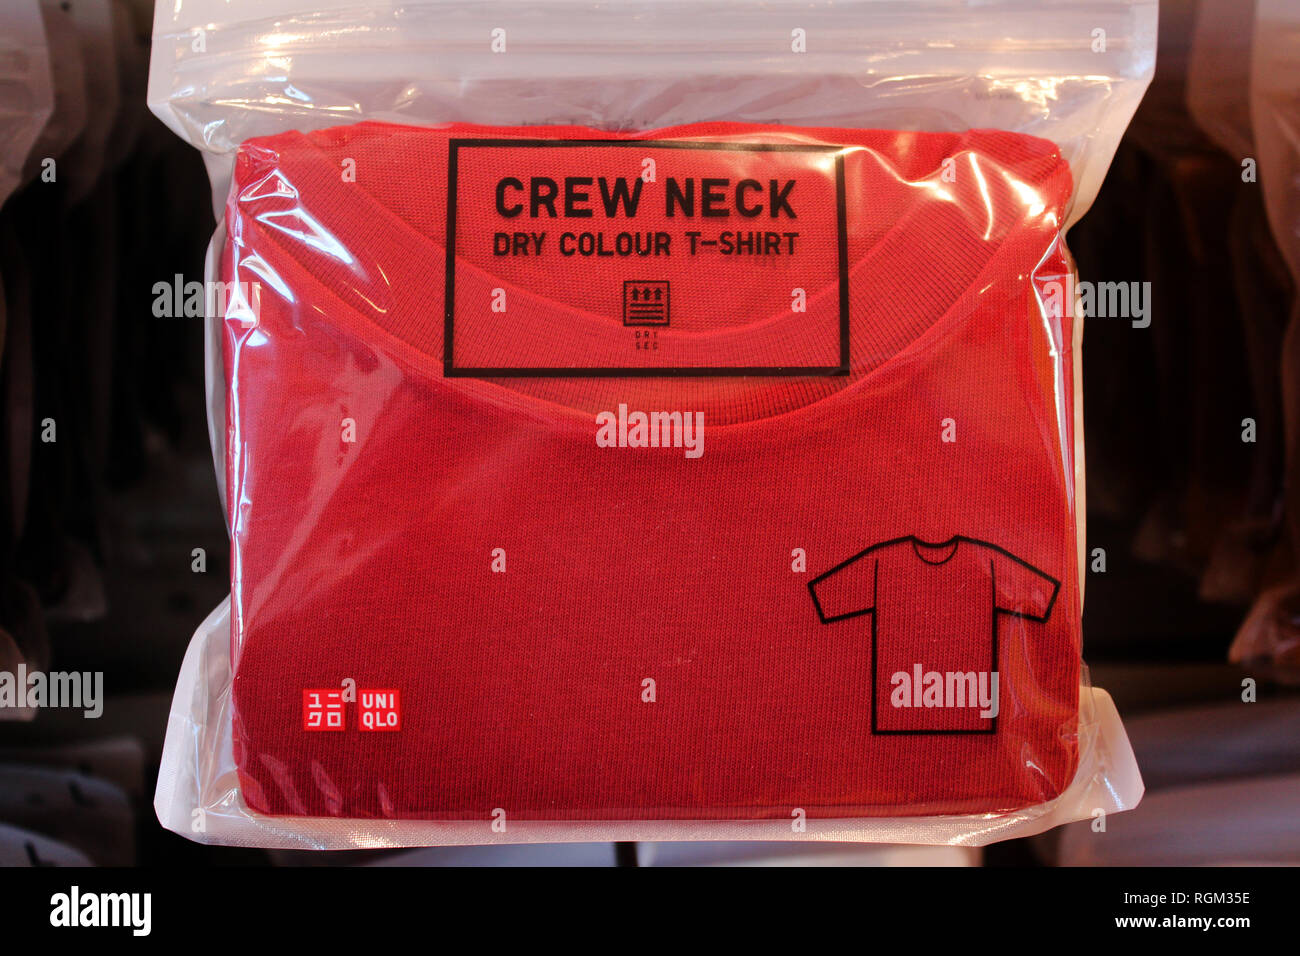 Uniqlo red T-shirt displayed packed in plastic bag, close-up Stock Photo -  Alamy